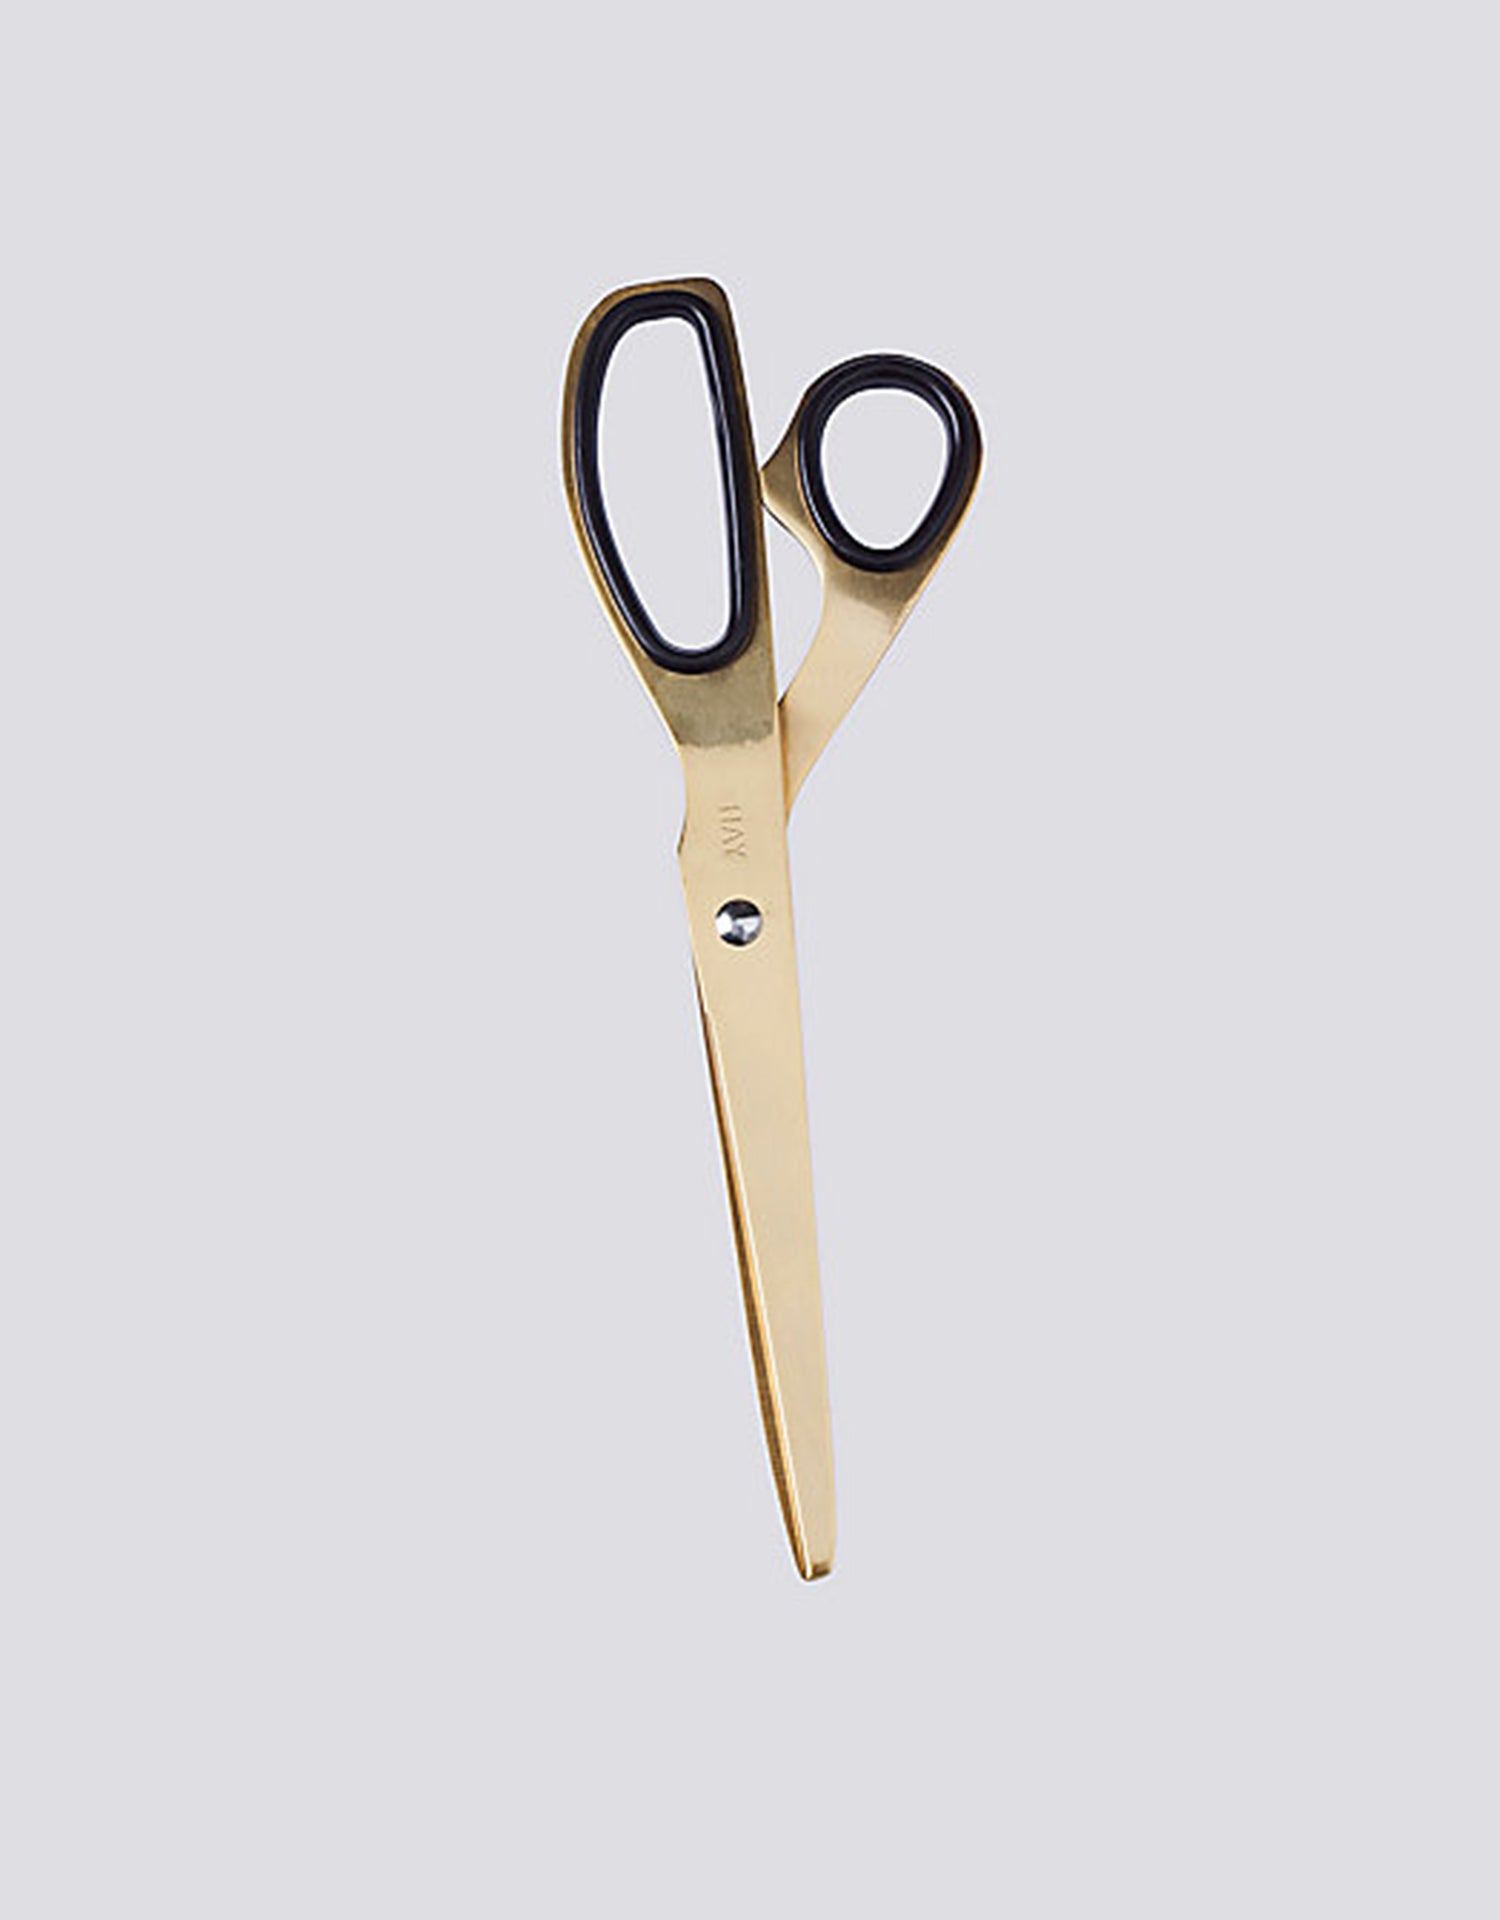 HAY Scissors in brass. Available at Easy Tiger Goods Toronto.